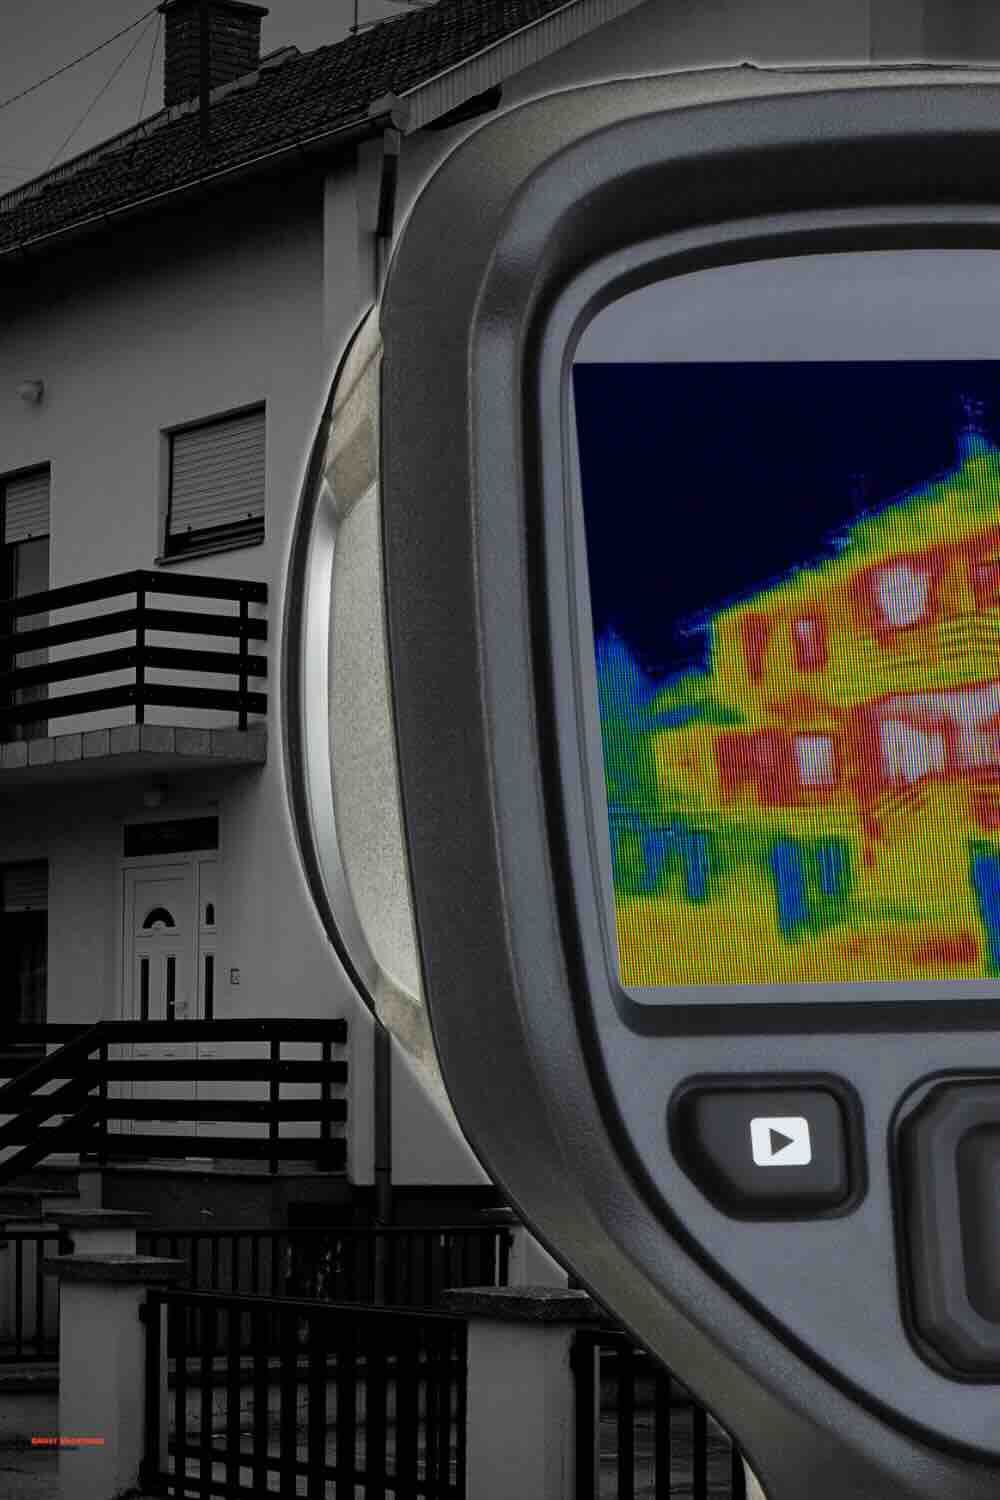 Thermal imaging cameras are essential ghost hunting tools, detecting temperature anomalies to identify cold spots and potential paranormal activity in any investigation.